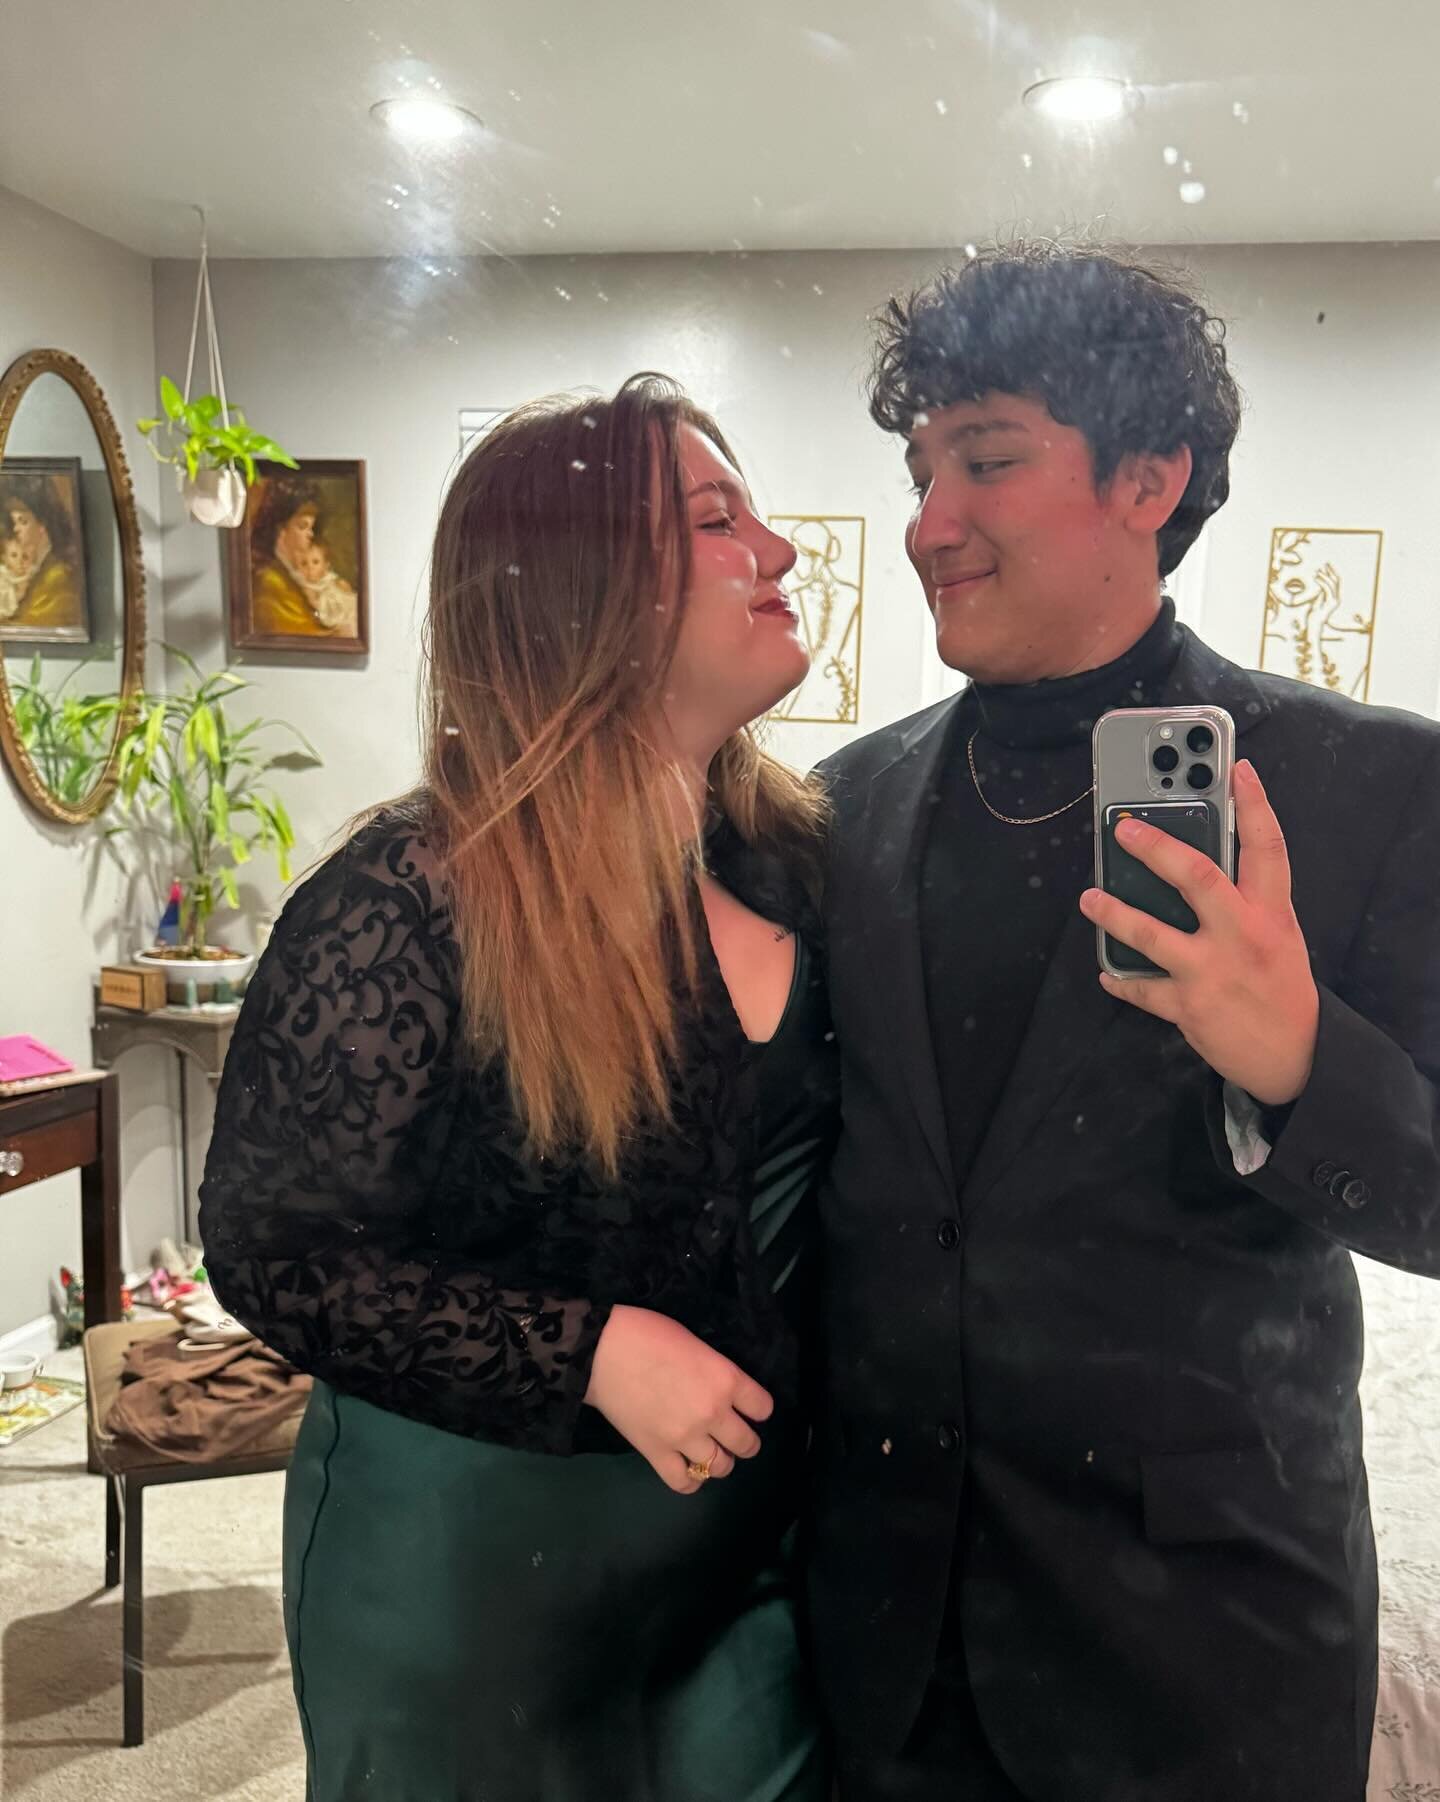 Reflecting on the past year, I&rsquo;m grateful for the growth and the stronger support structure I&rsquo;ve built in my life. My heart is full of gratitude for my beautiful and amazing girlfriend, Nina, who has been my number one supporter through t